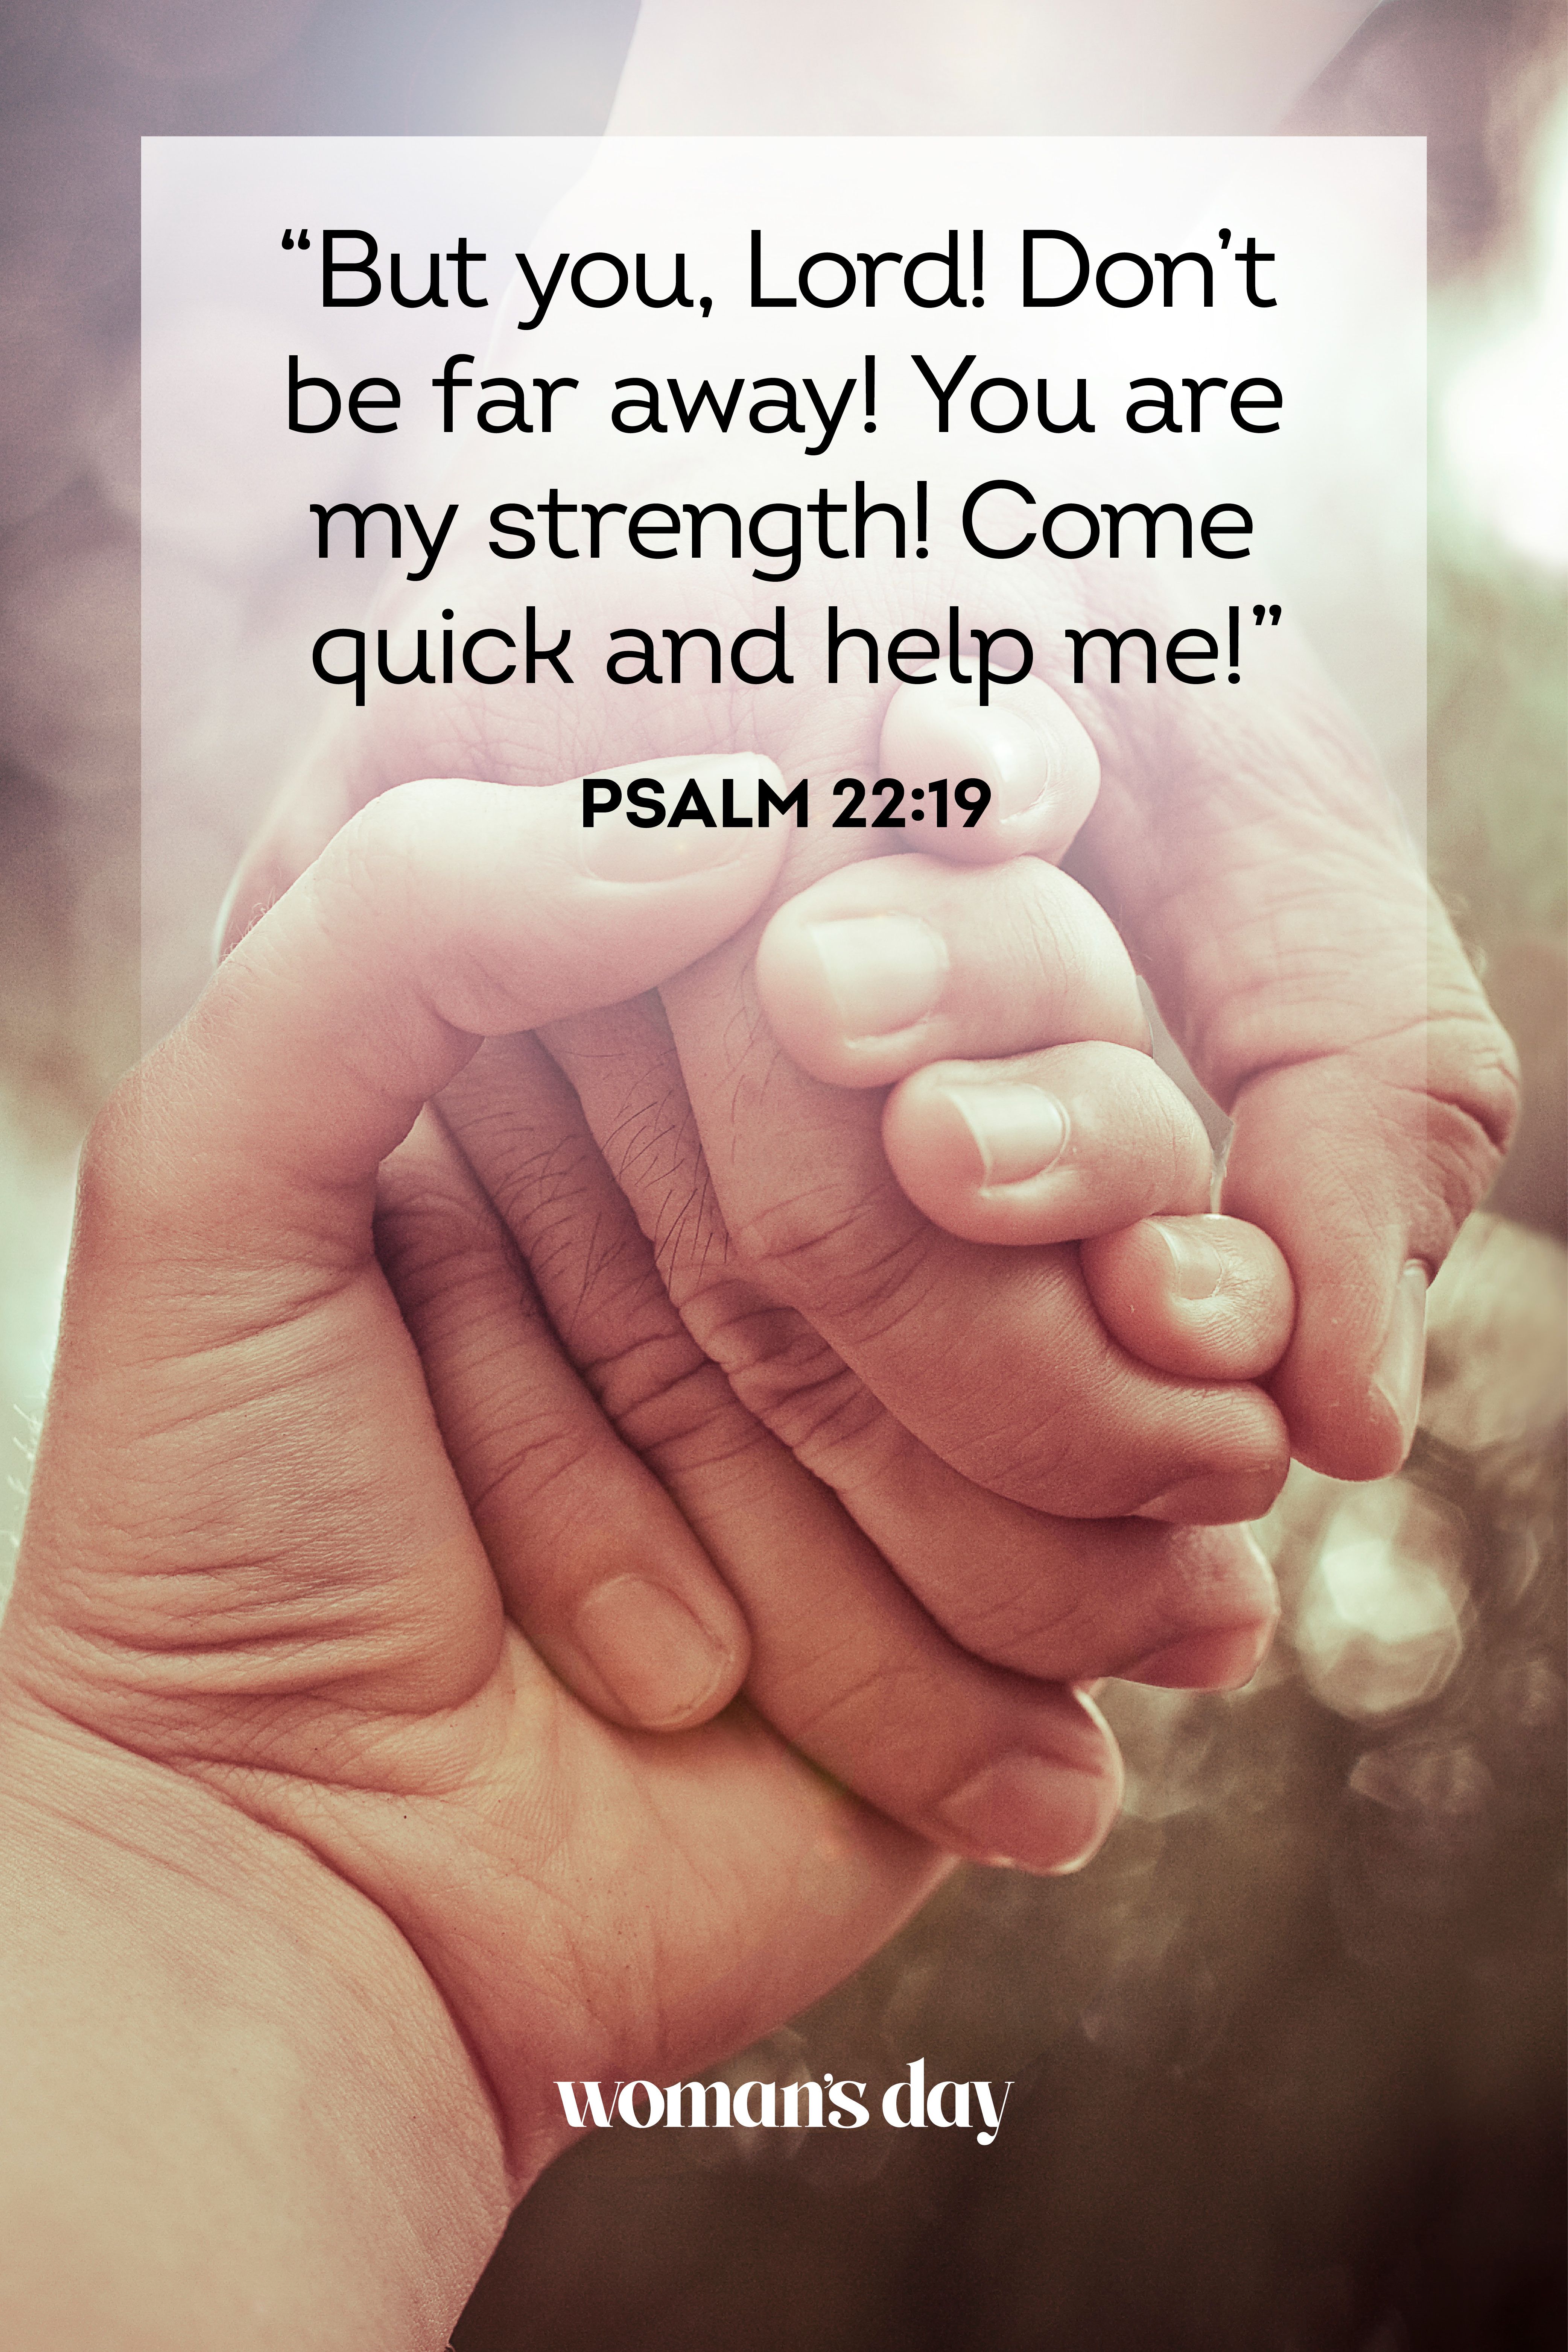 prayer quotes for hard times